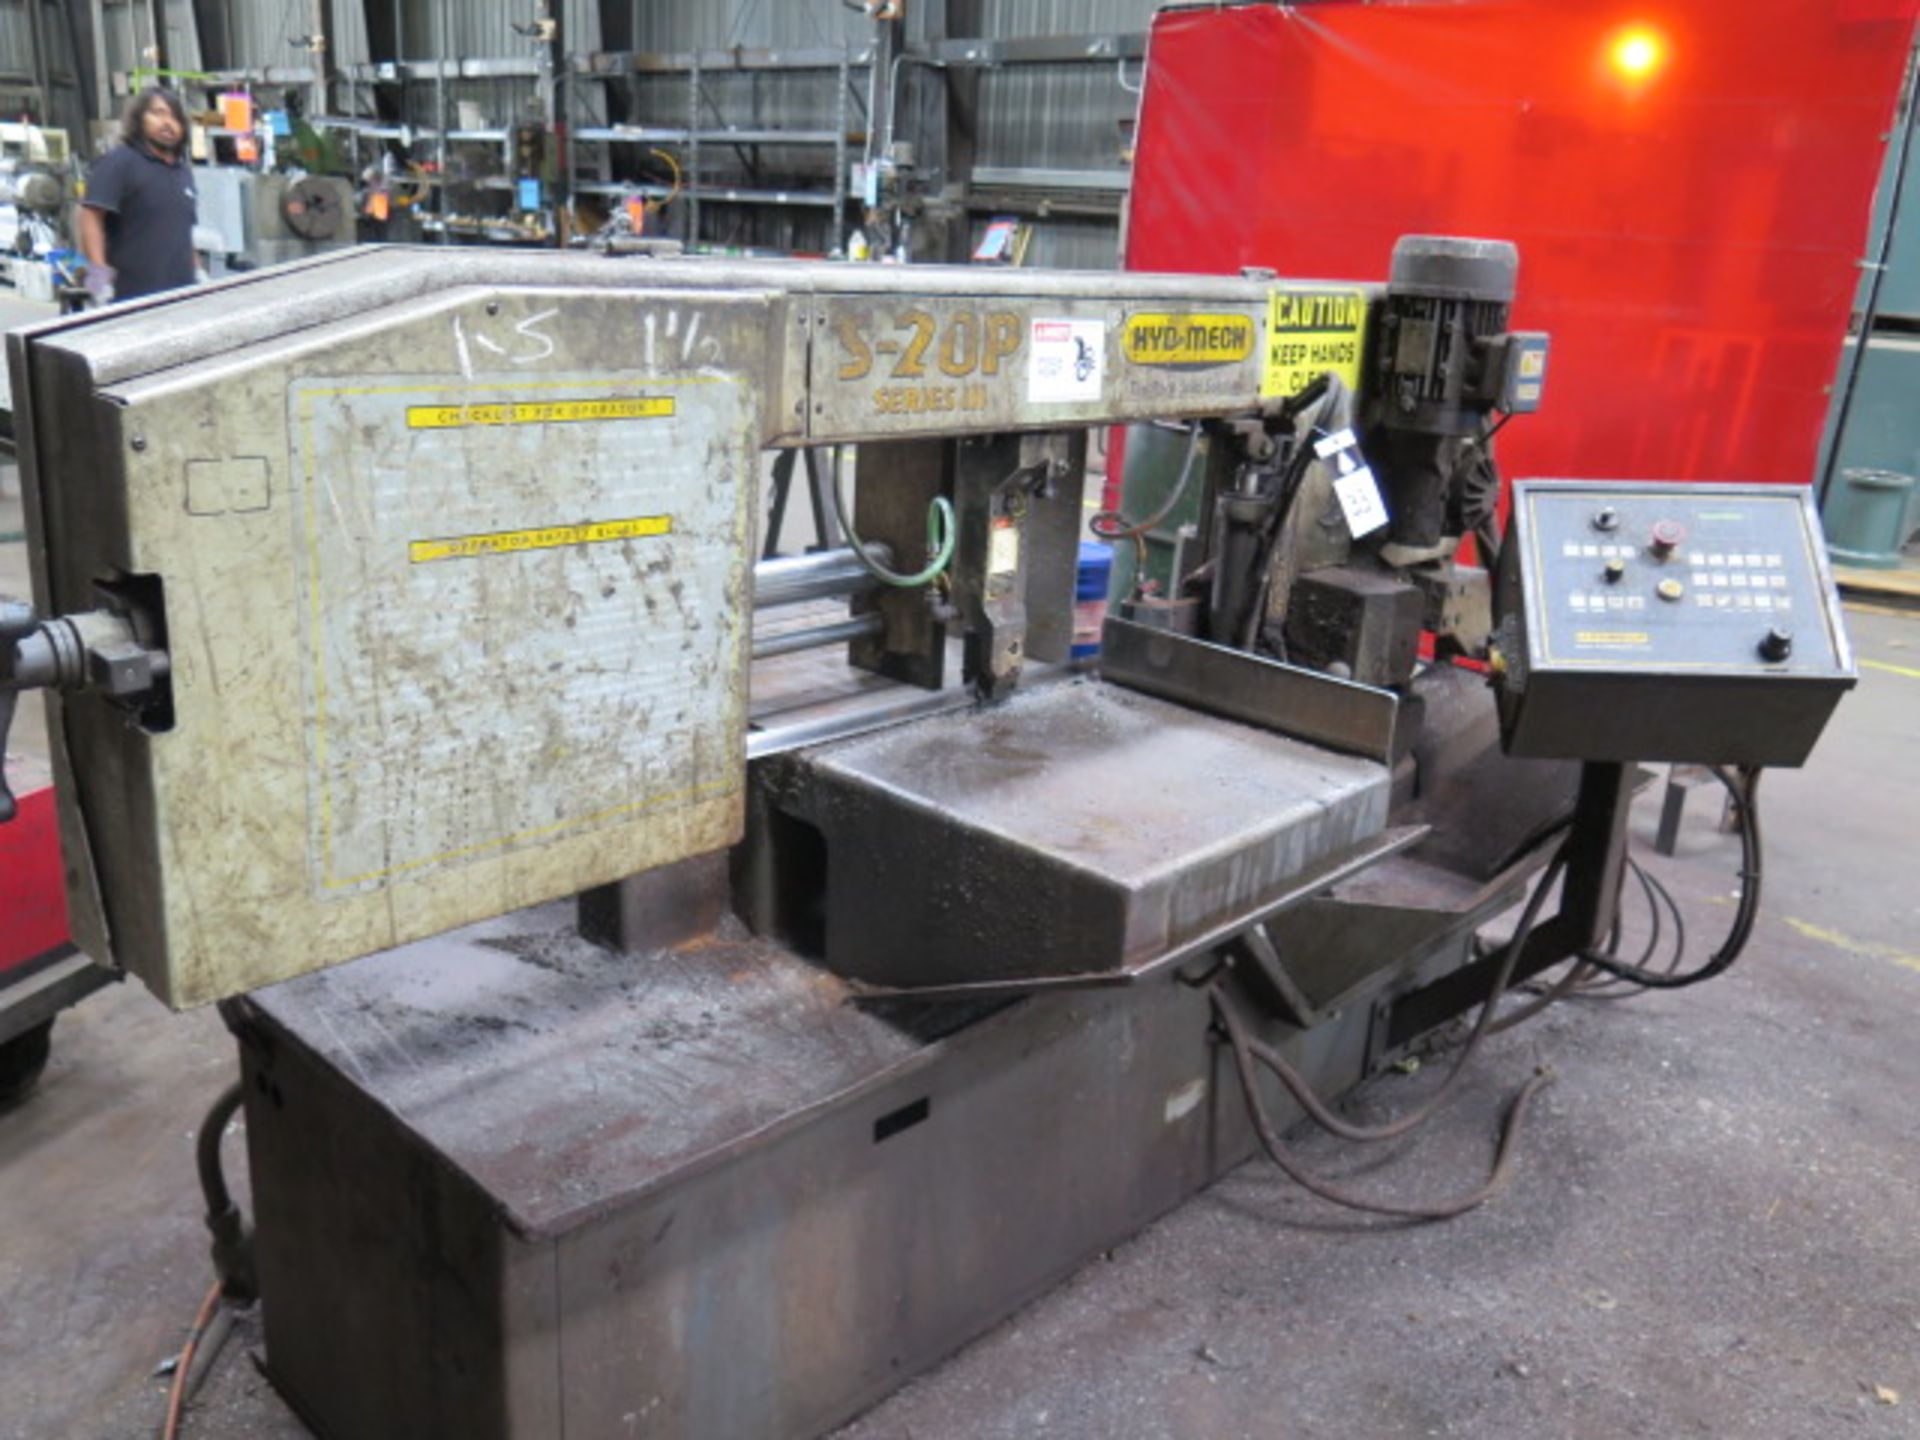 Hyd-Mech S-20P Series III 13” Horizontal Band Saw w/ Hyd-Mech Controls, Hyd Clamping, SOLD AS IS - Bild 3 aus 11